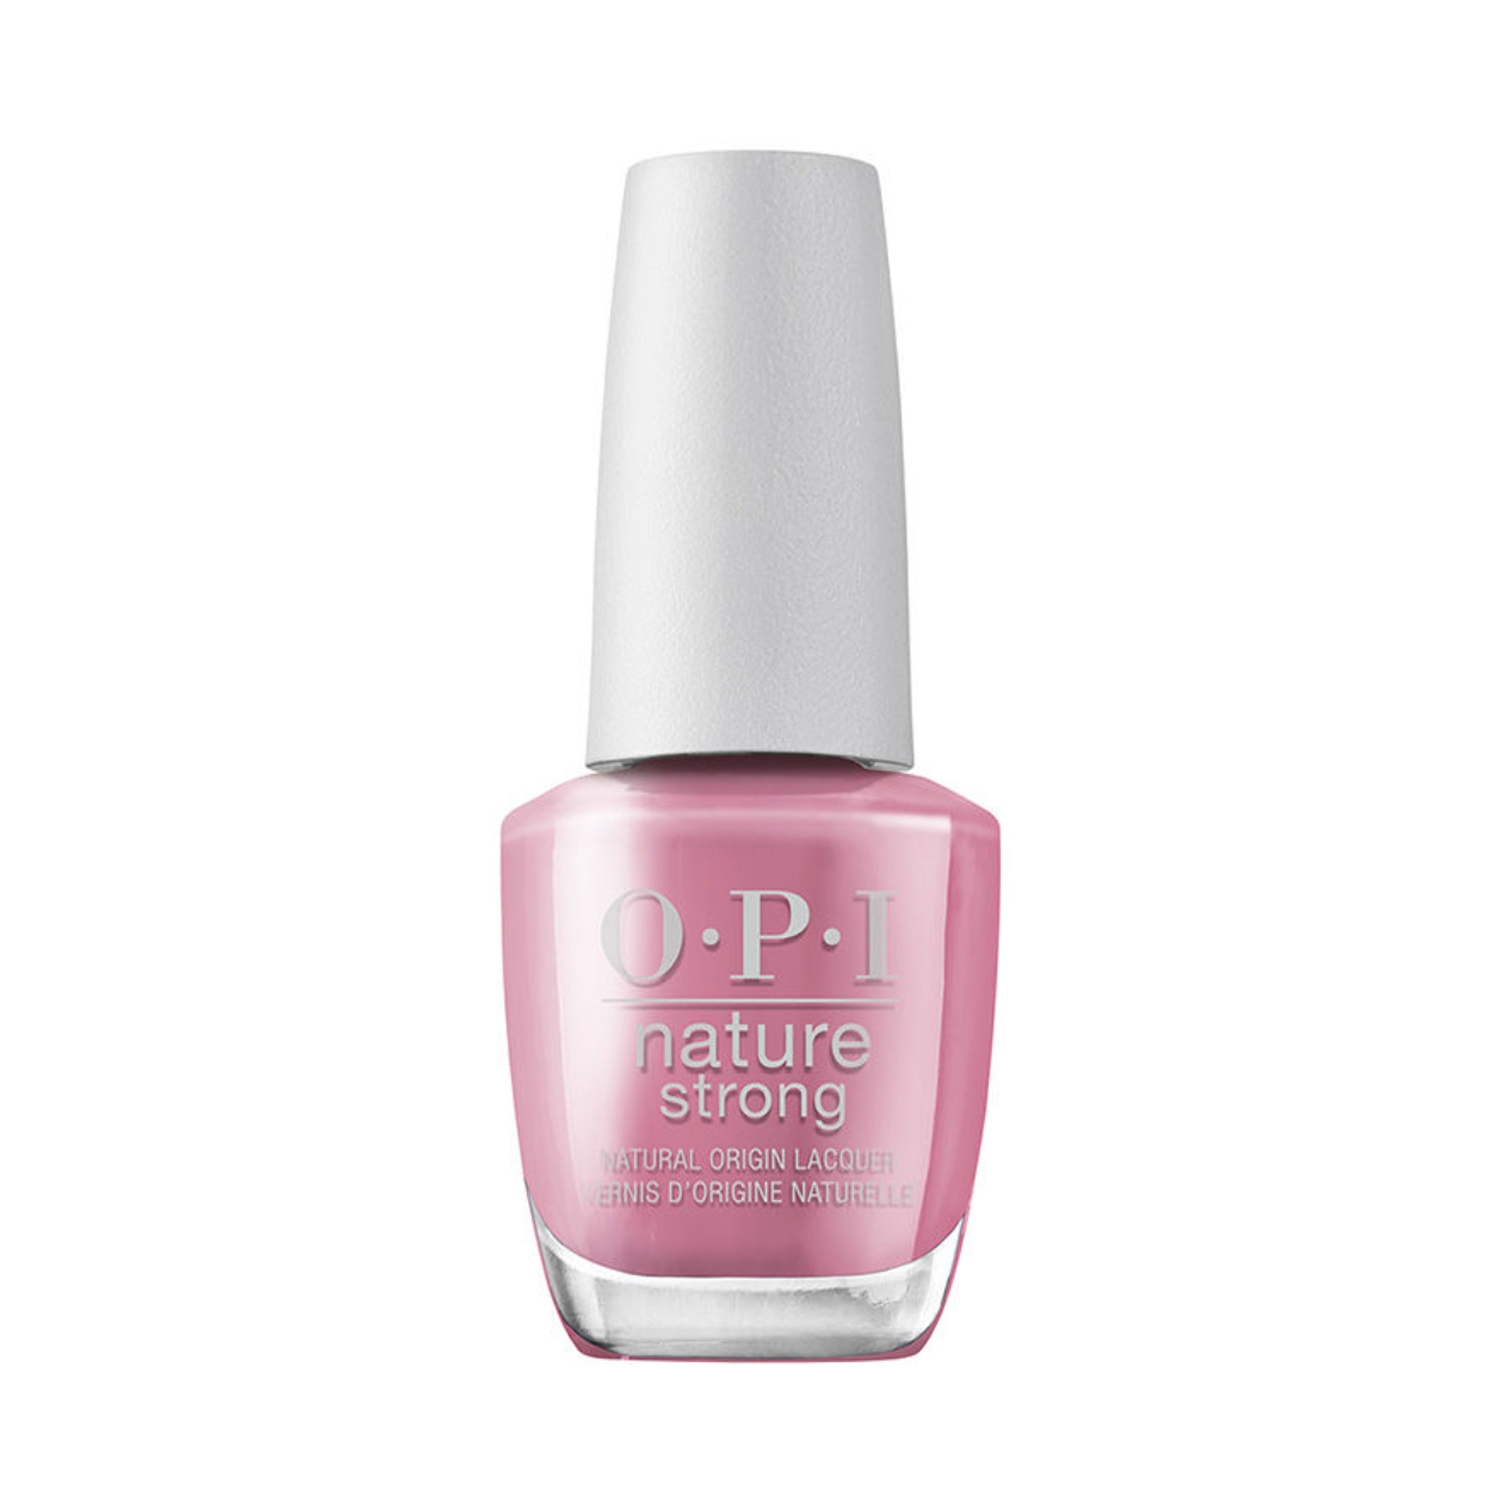 O.P.I Nature Strong Nail Paint - Knowledge Is Flower (15ml)